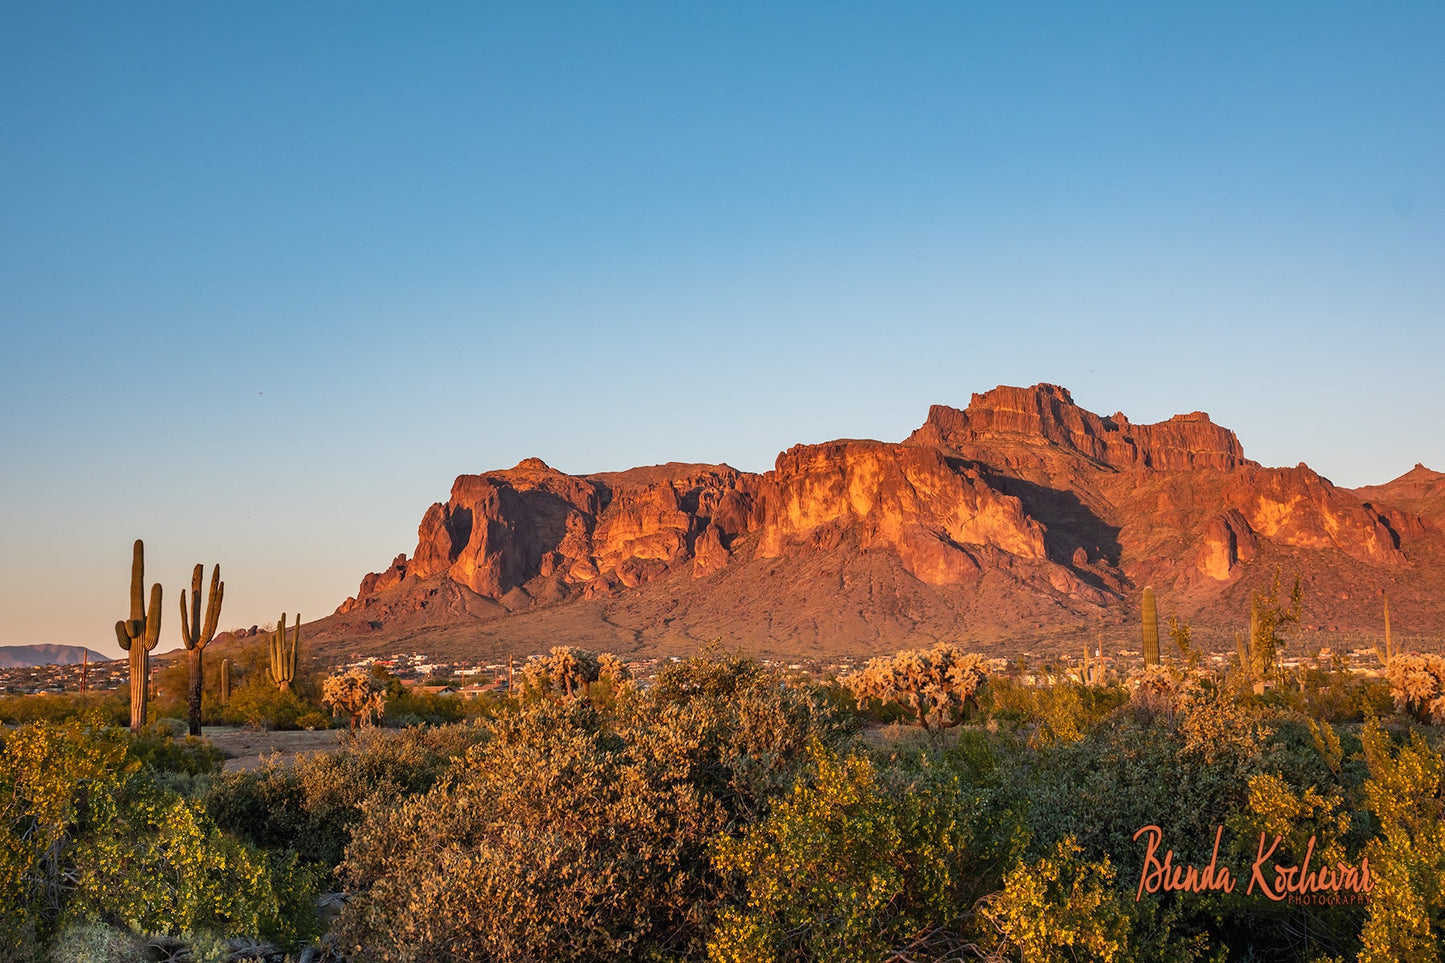 Cougar Sunset at Superstition Mountain 30”x16” Canvas